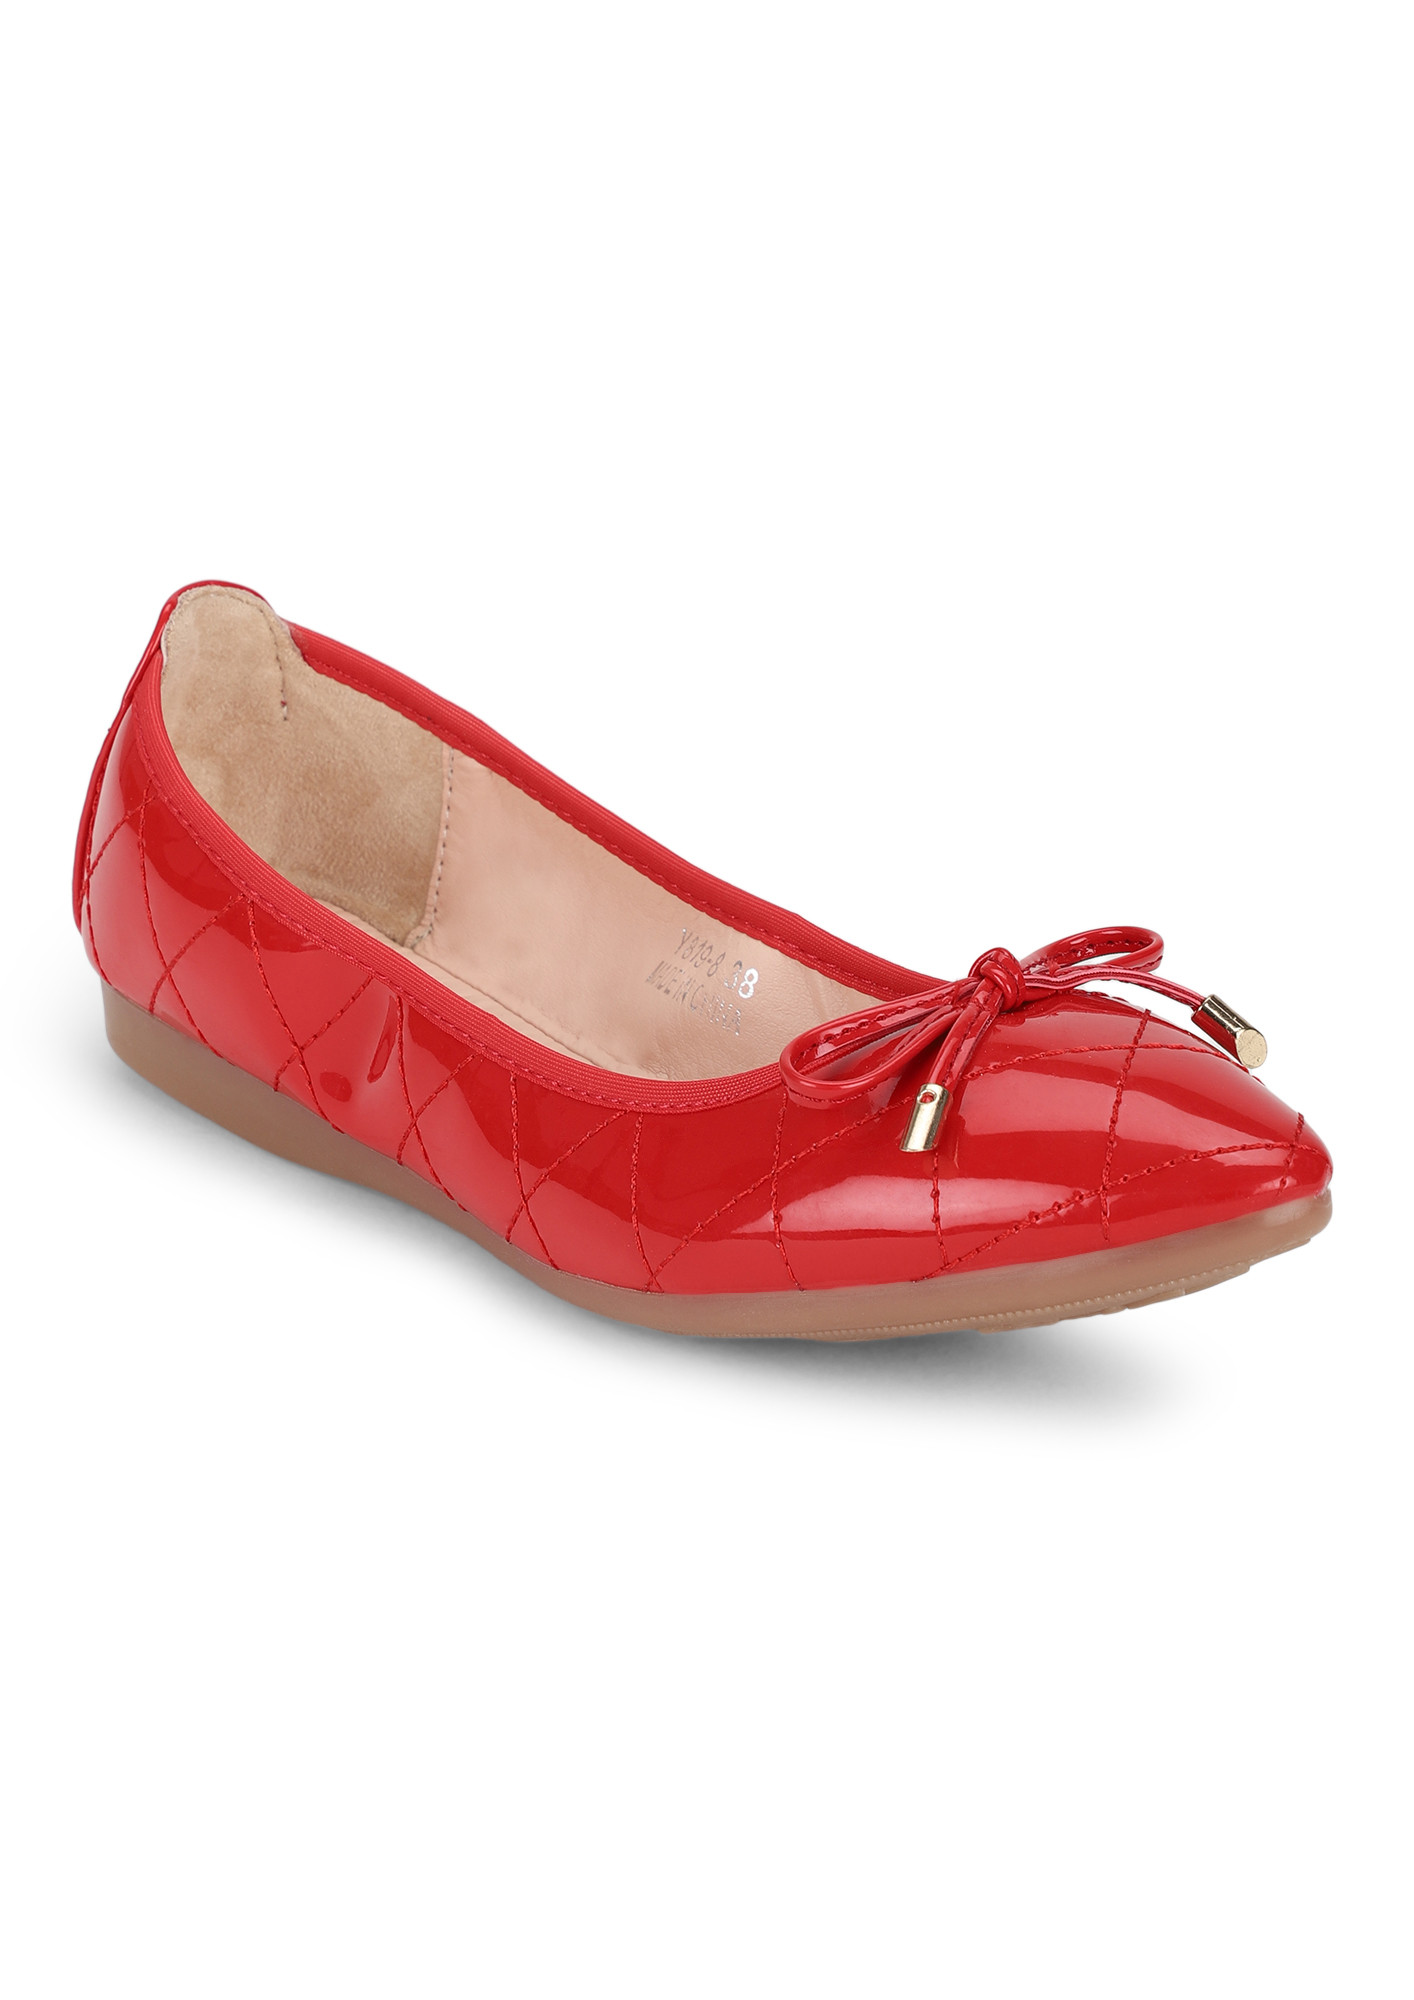 STITCH IT TOGETHER RED BALLET FLATS